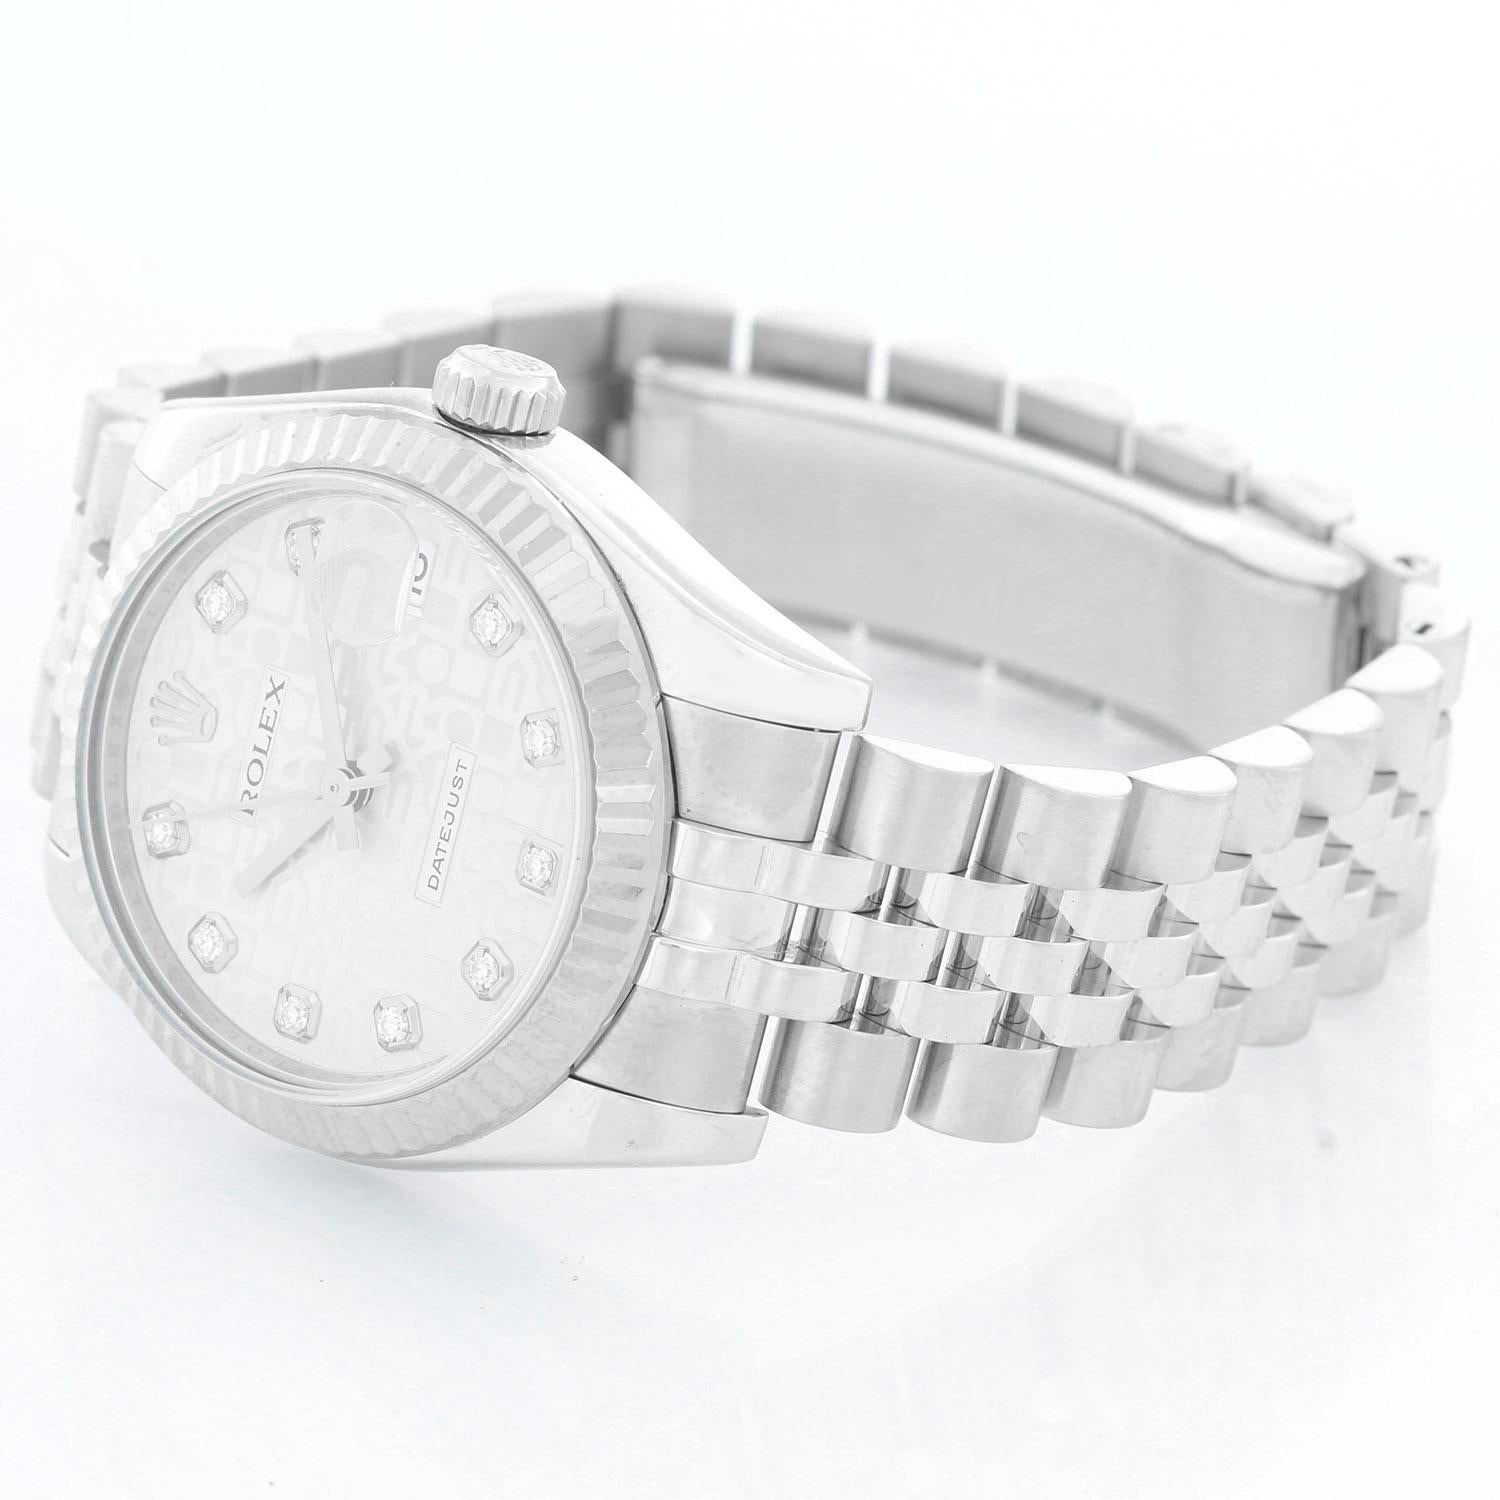 Rolex Datejust Midsize Men's or Ladies Steel Watch 178274 - Automatic winding; 31 jewel; sapphire crystal. Stainless steel case with 18k white gold fluted bezel (31mm diameter). Silver Rolex Jubilee diamond dial. Stainless steel hidden-clasp Jubilee